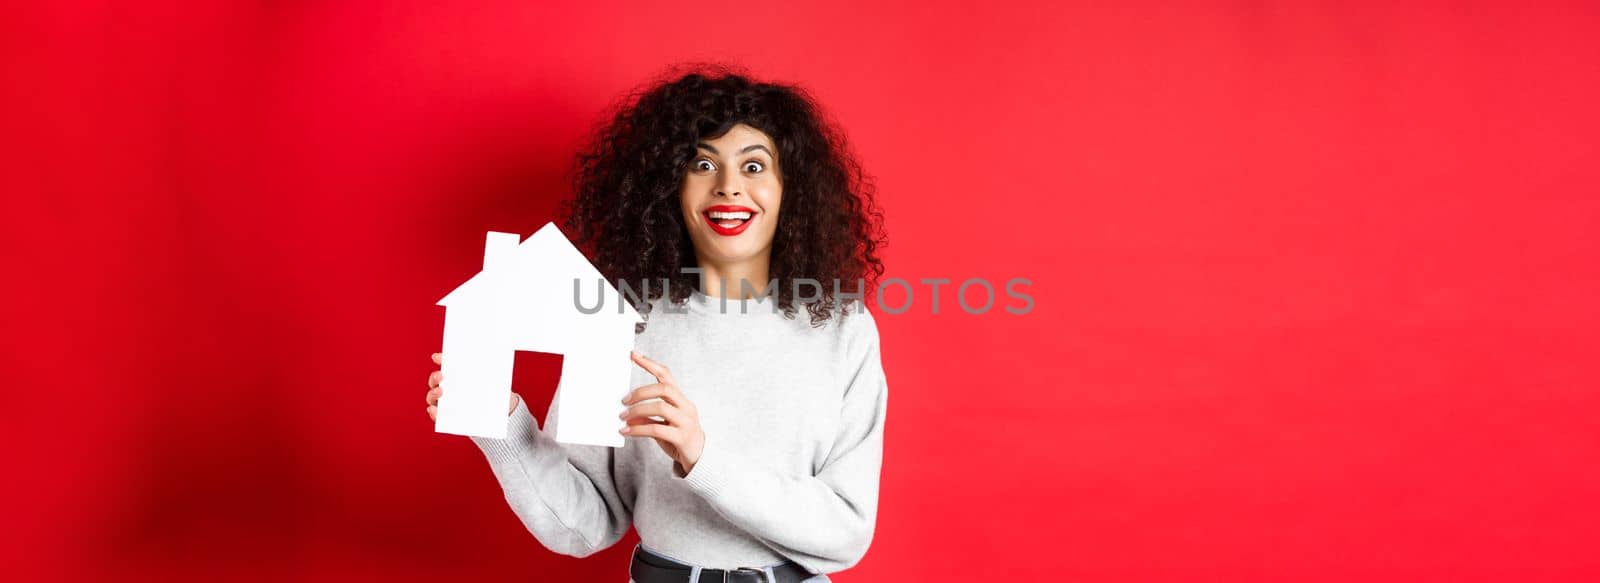 Real estate. Excited smiling woman showing paper house cutout and looking amazed, standing on red background.